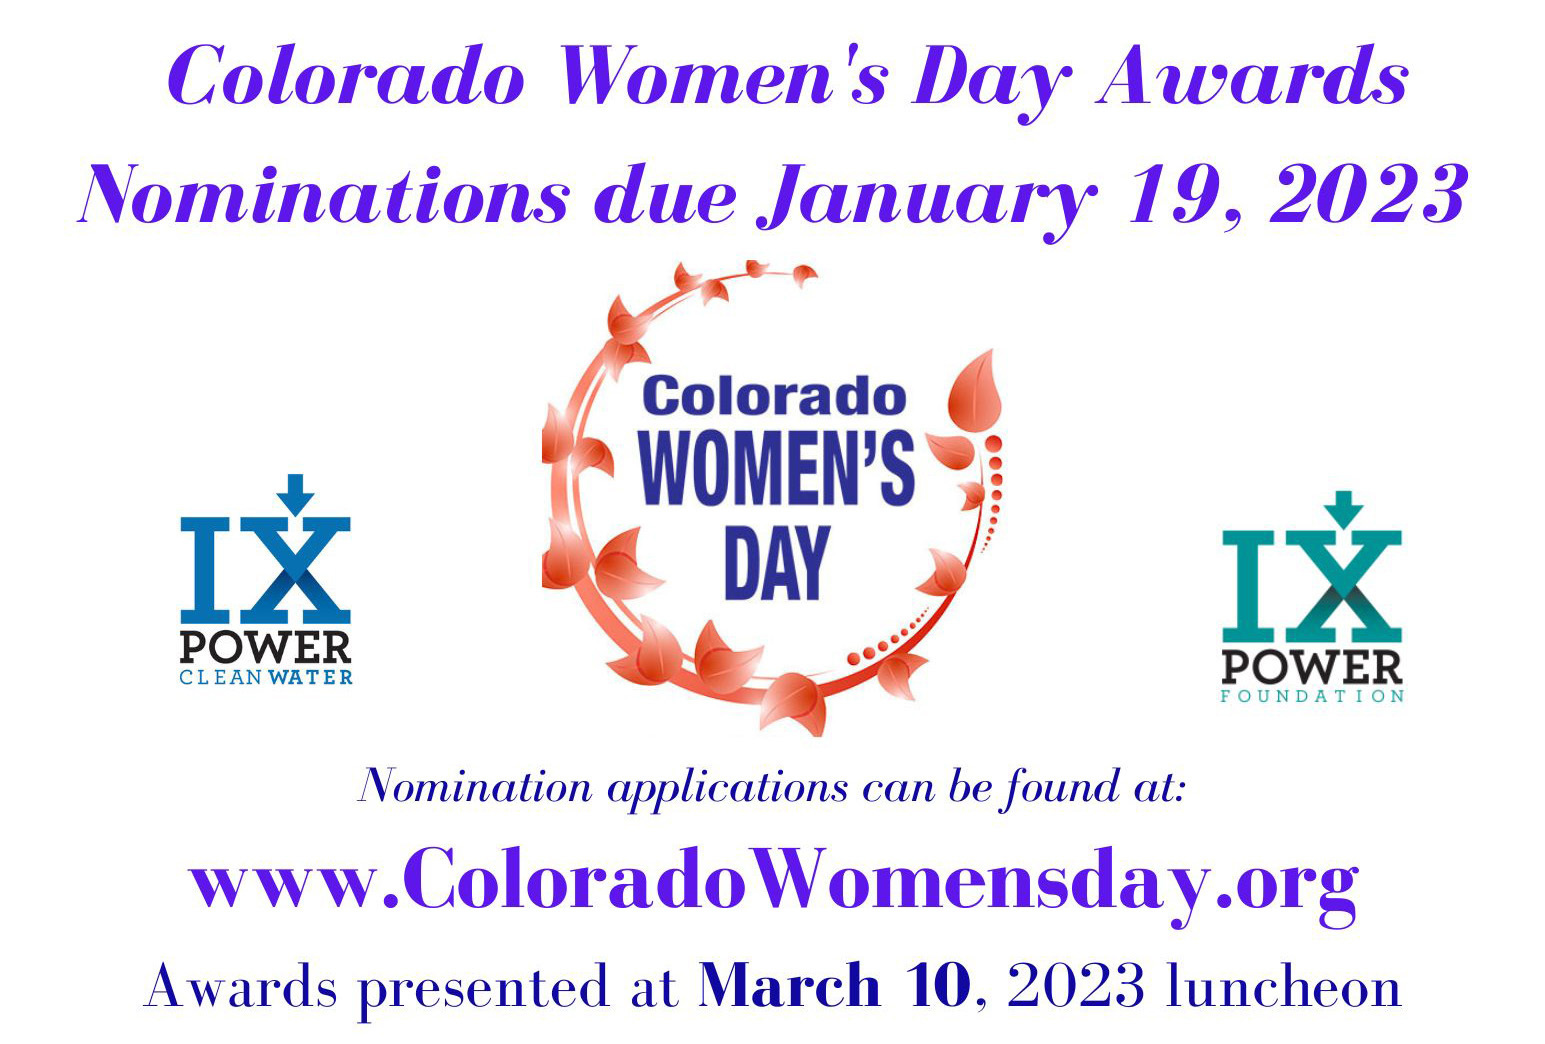 Co Women's Day Awards Nominations due Jan. 19, Golden, Colorado, United States